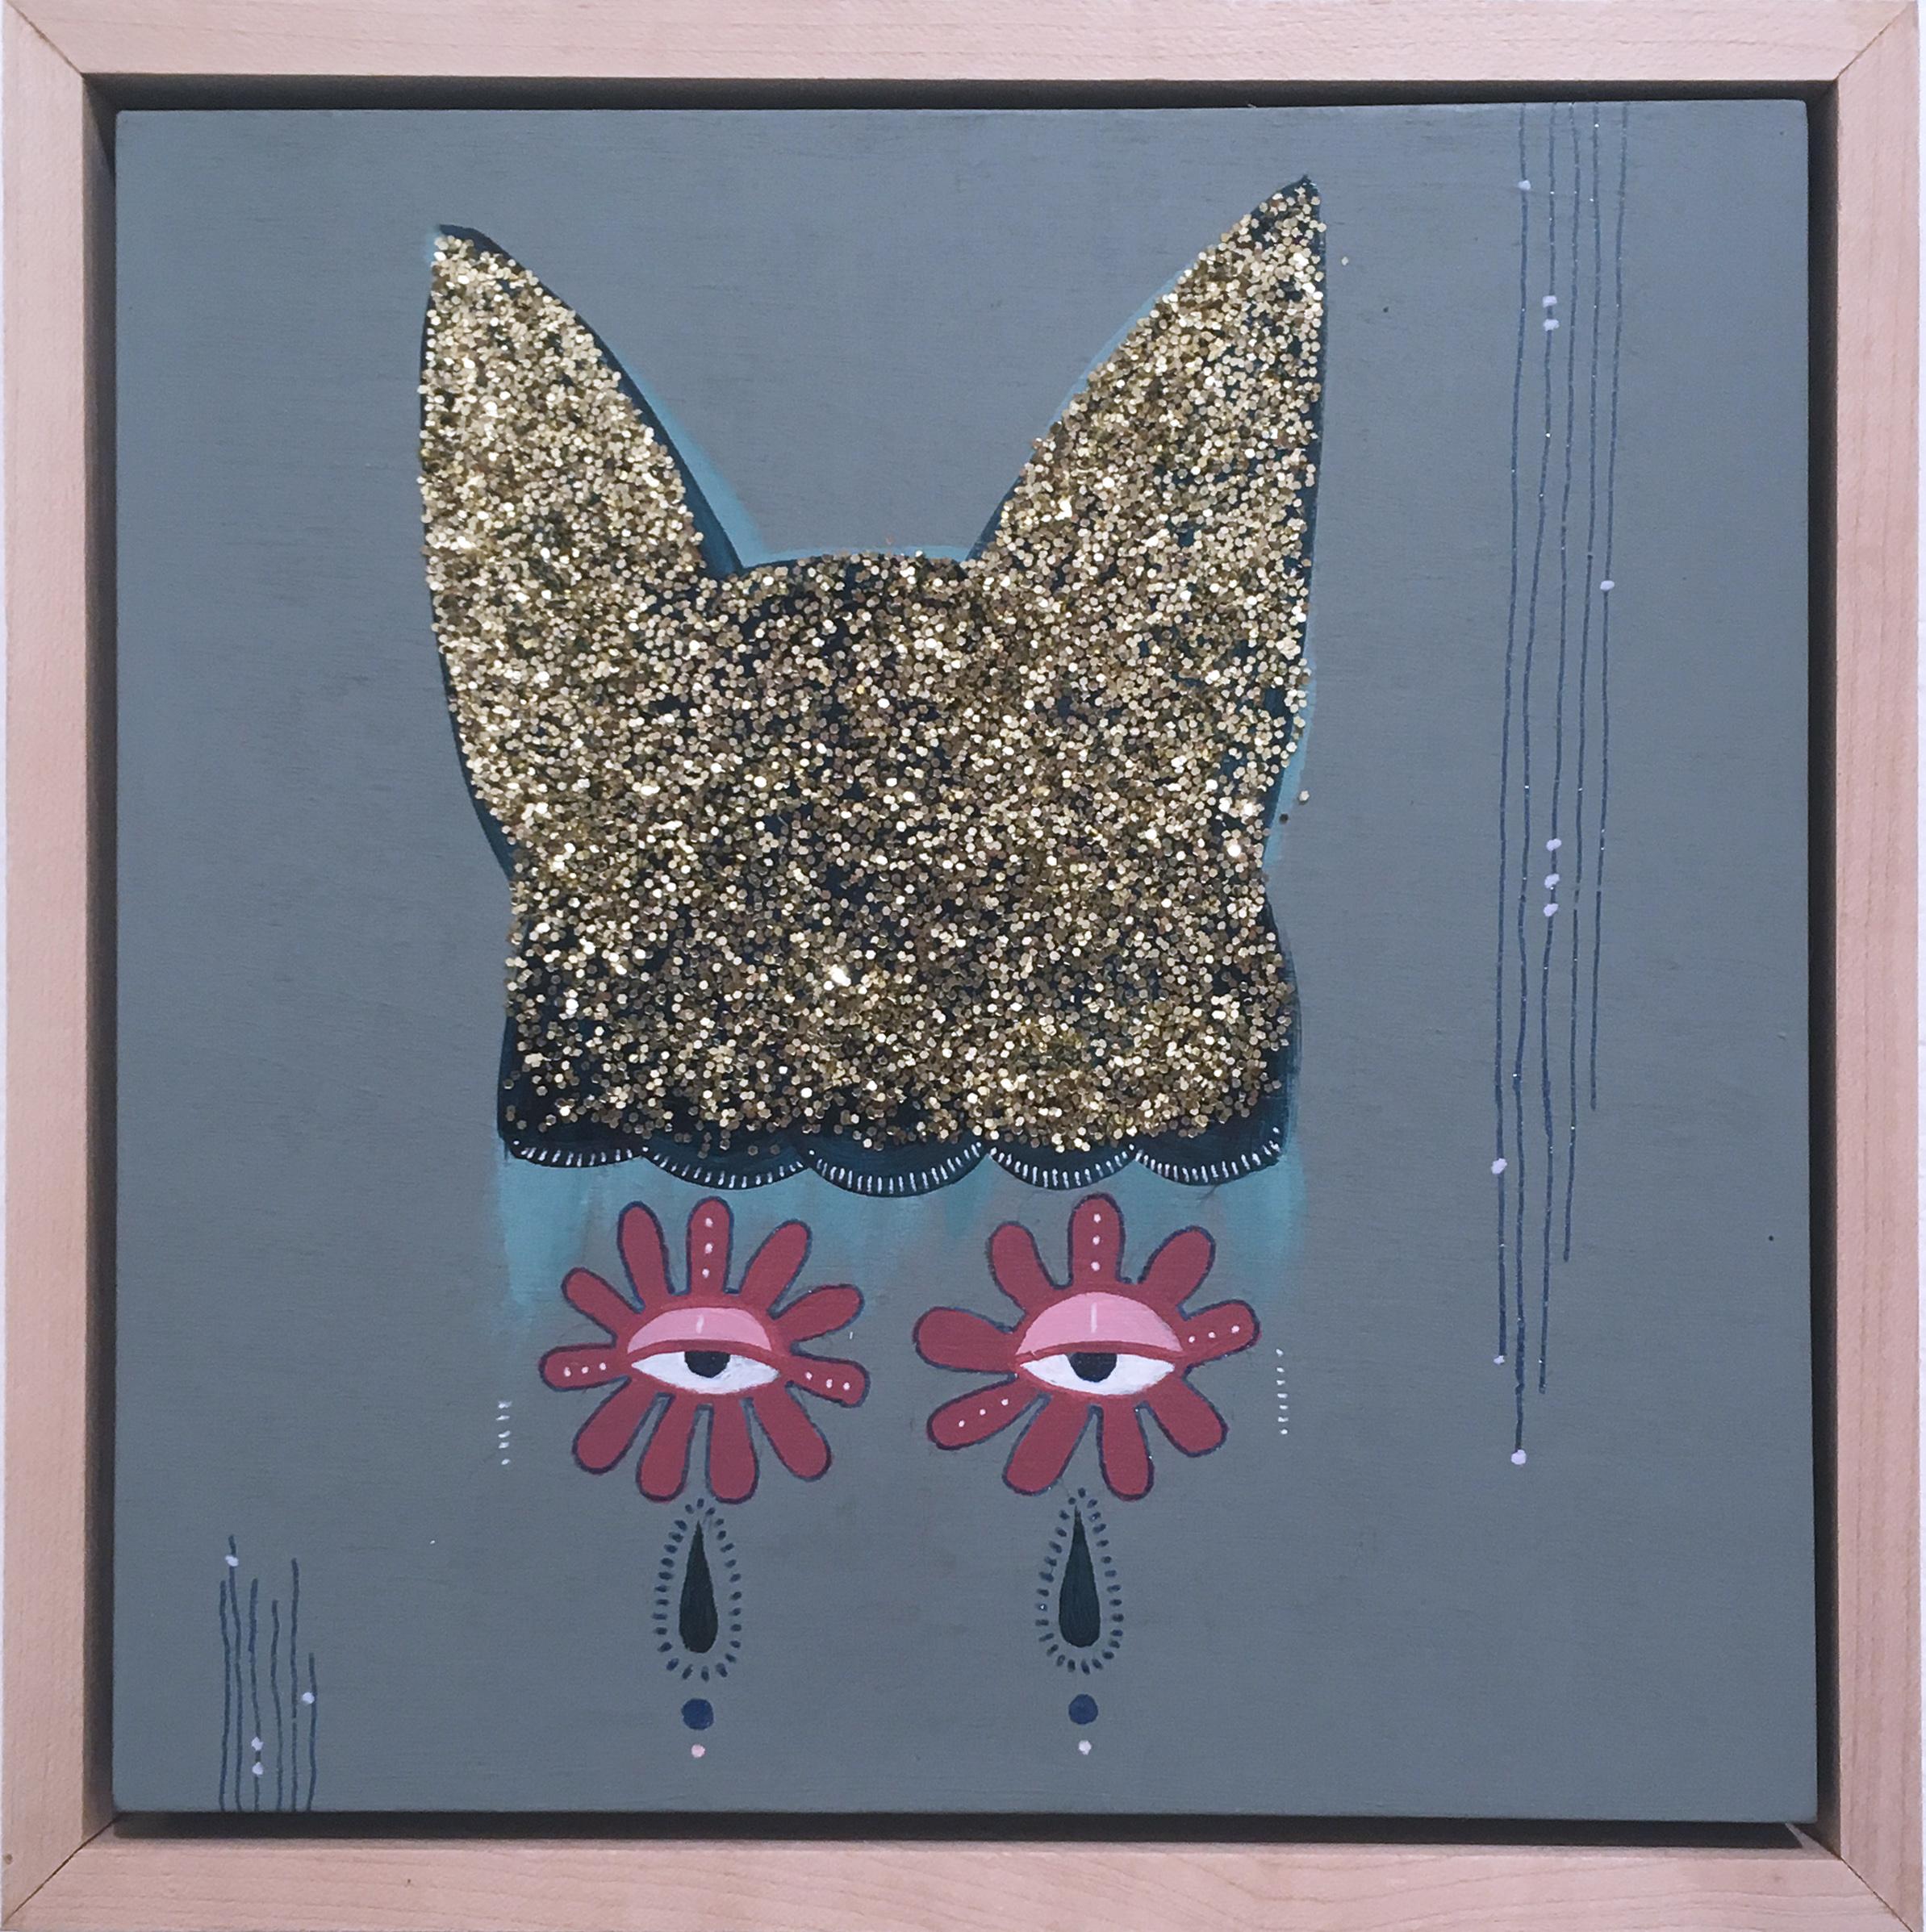 Milk Tears, 2018, blue, cat, mask, glitter, figurative, acrylic and ink on panel - Painting by Rebecca Johnson